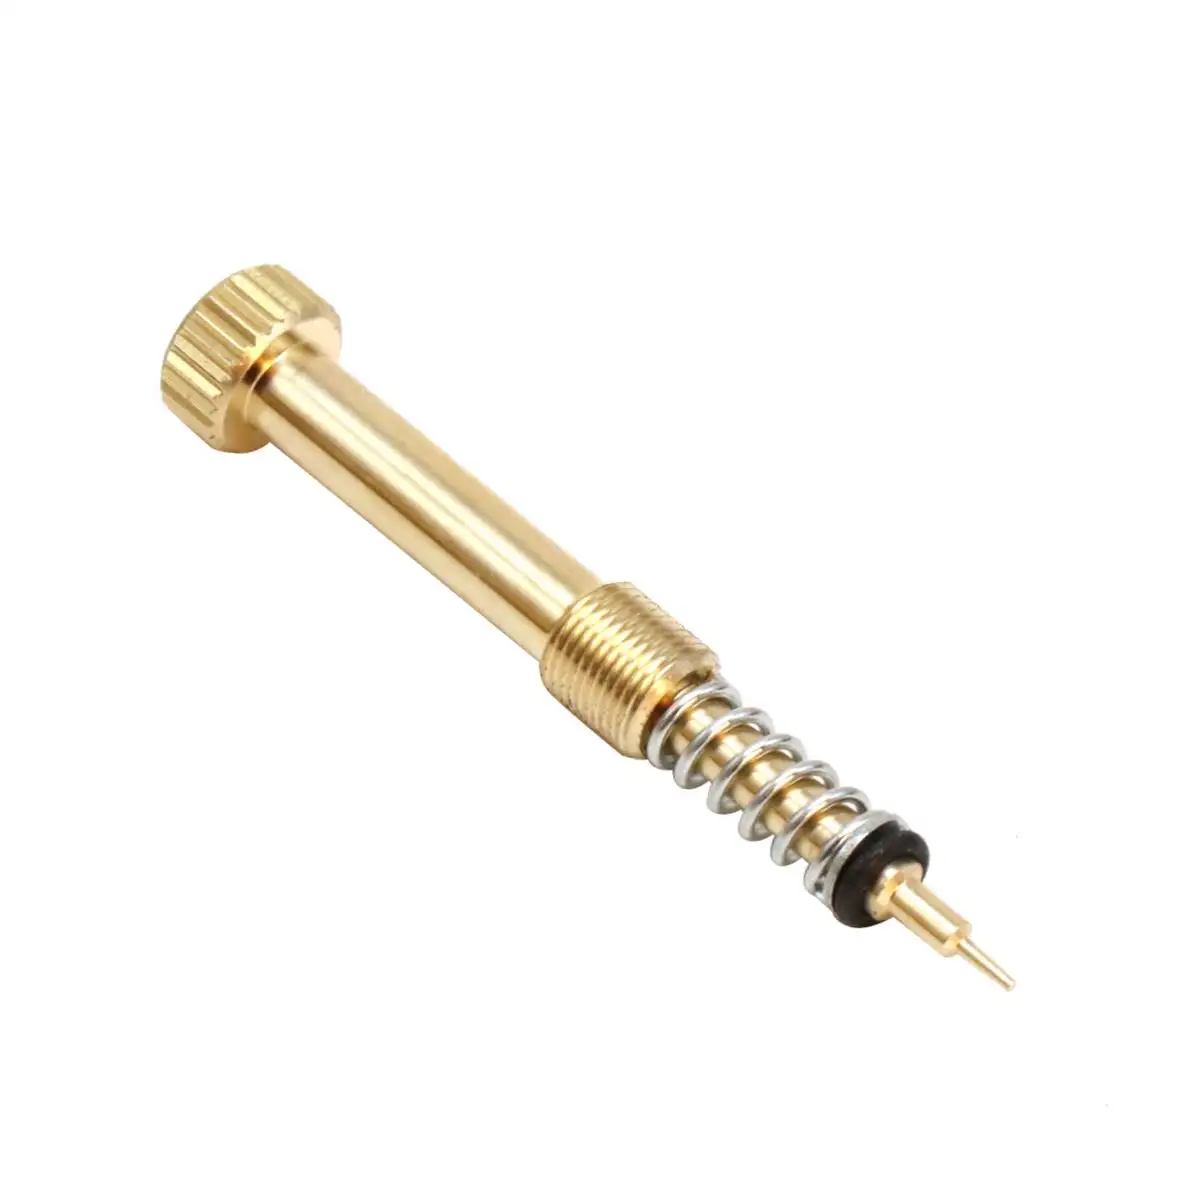 Motorcycle M6*0.5 Change Version Air Fuel Mixture Screw Fit For C-B400 GY-6 Carburetor